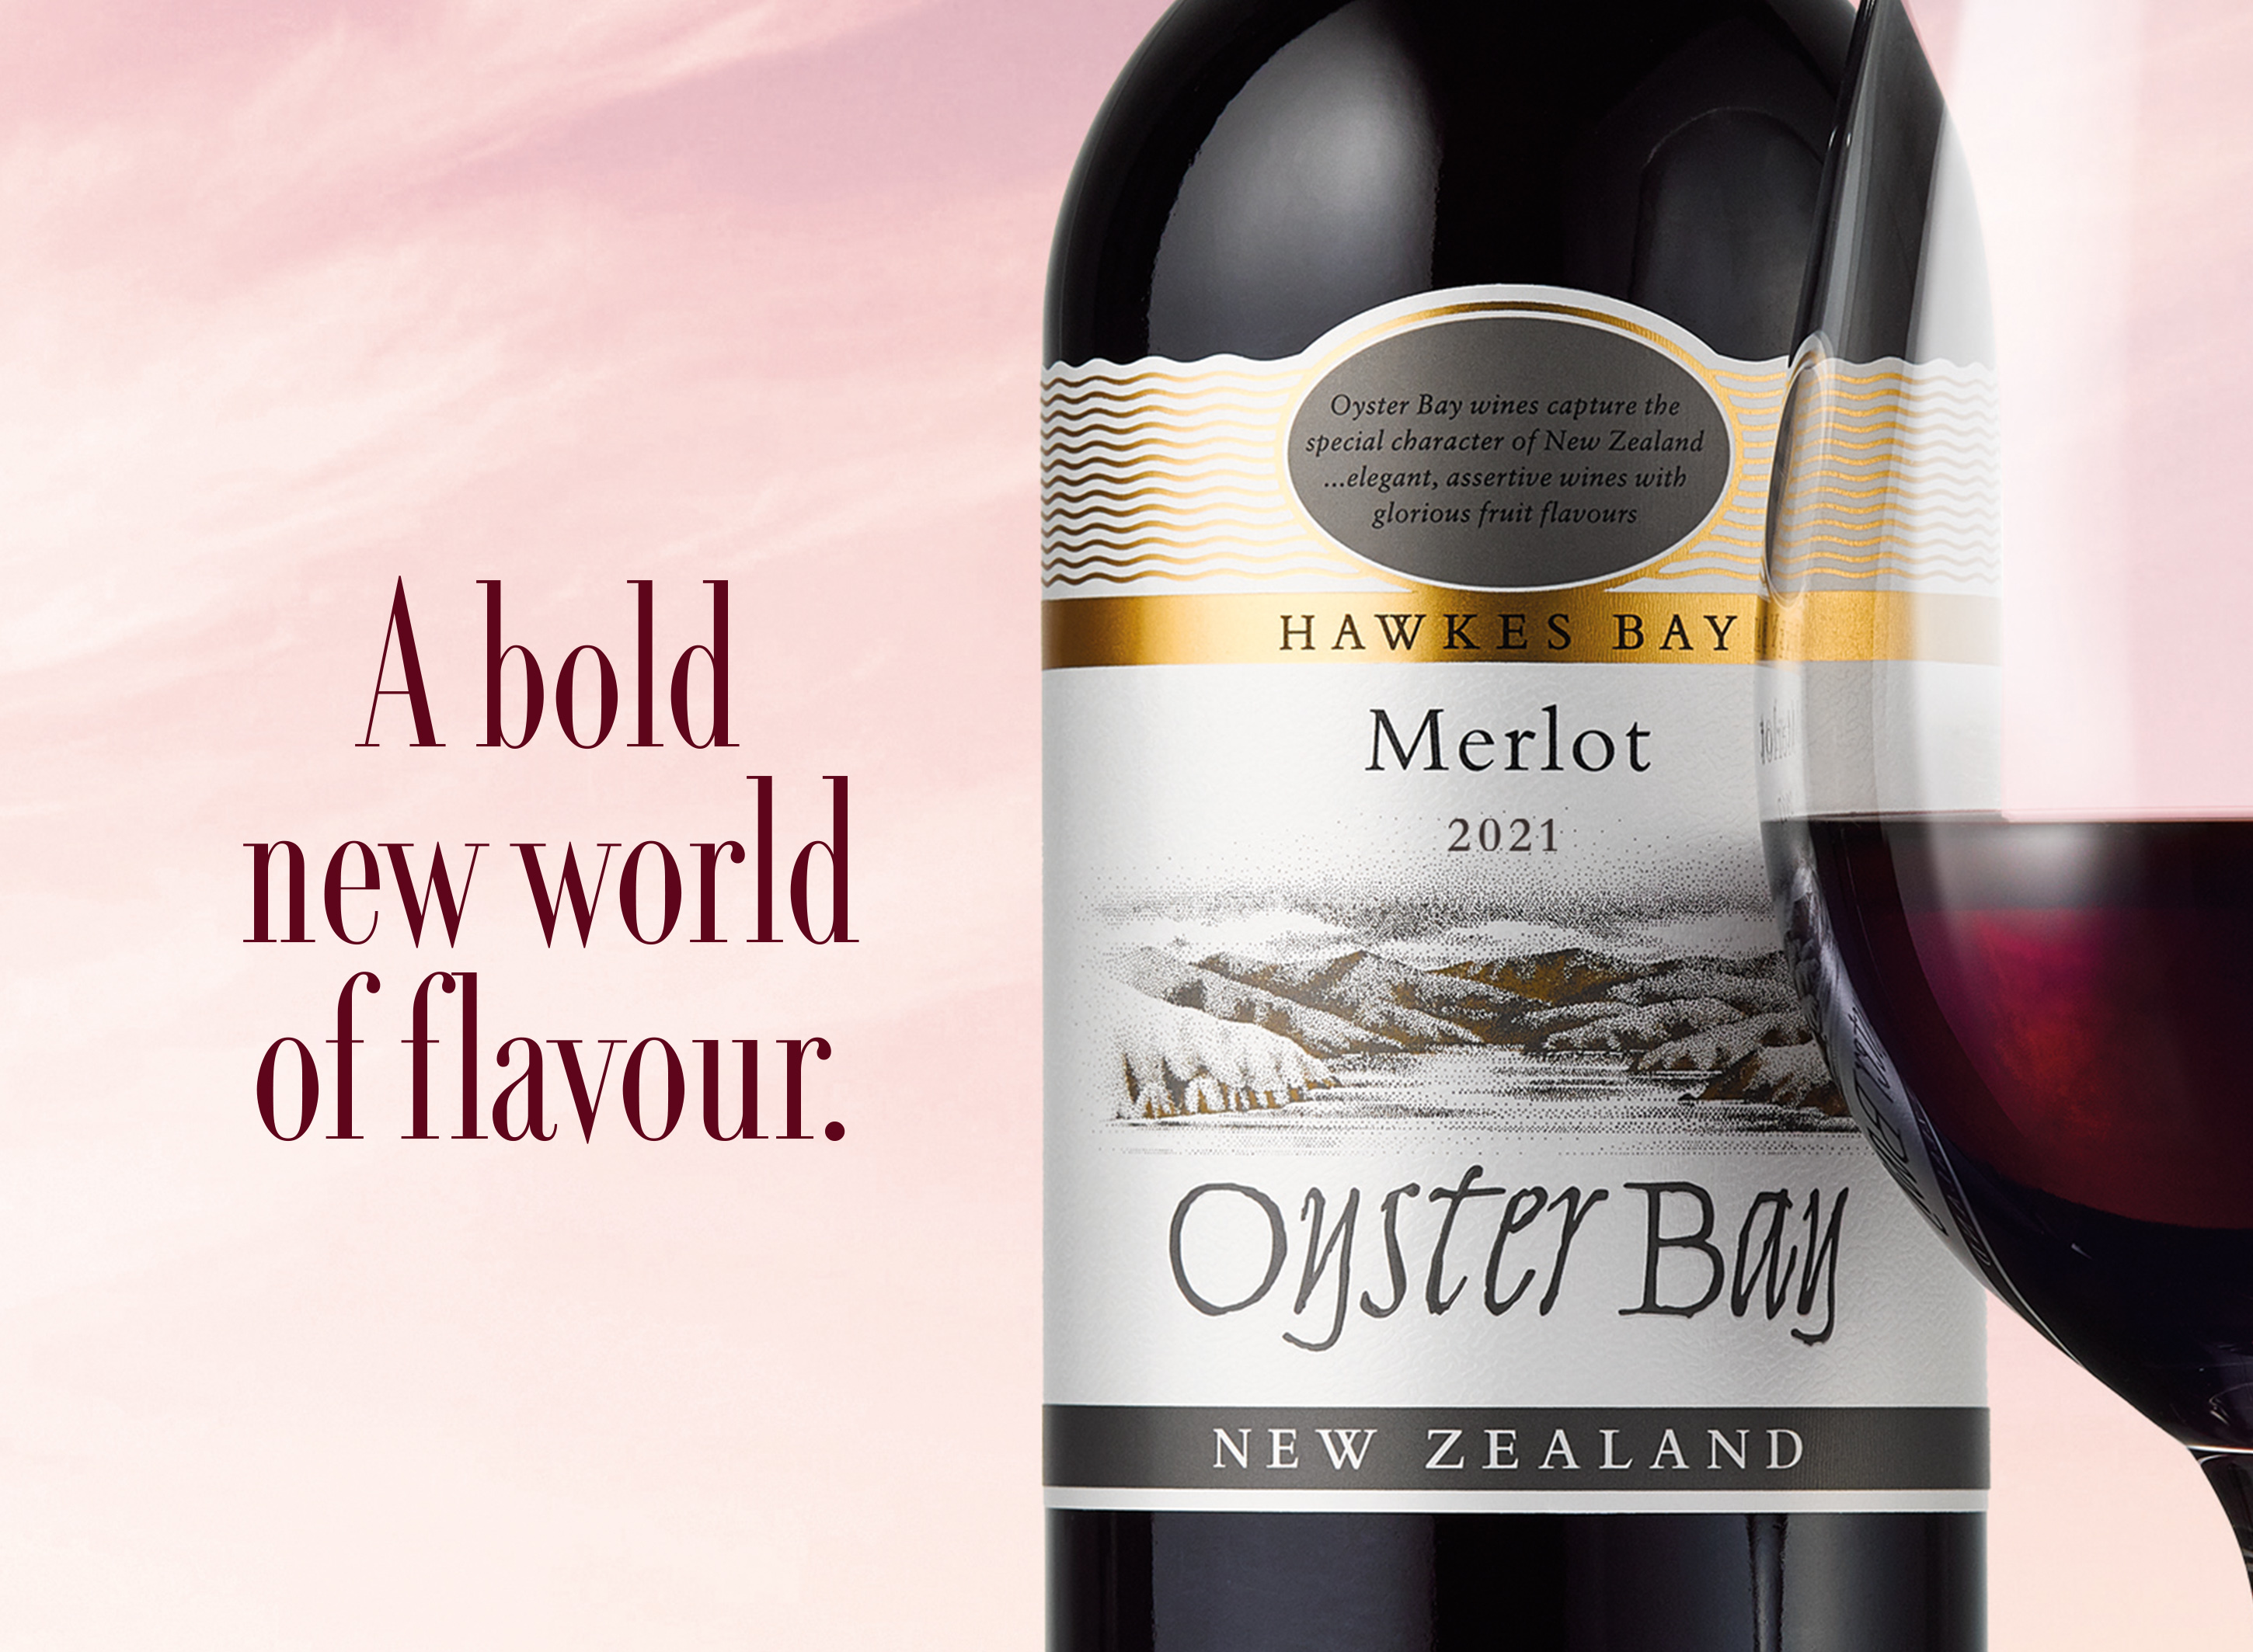 Oyster Bay Hawkes Bay New Zealand Merlot Wine bottle and glass